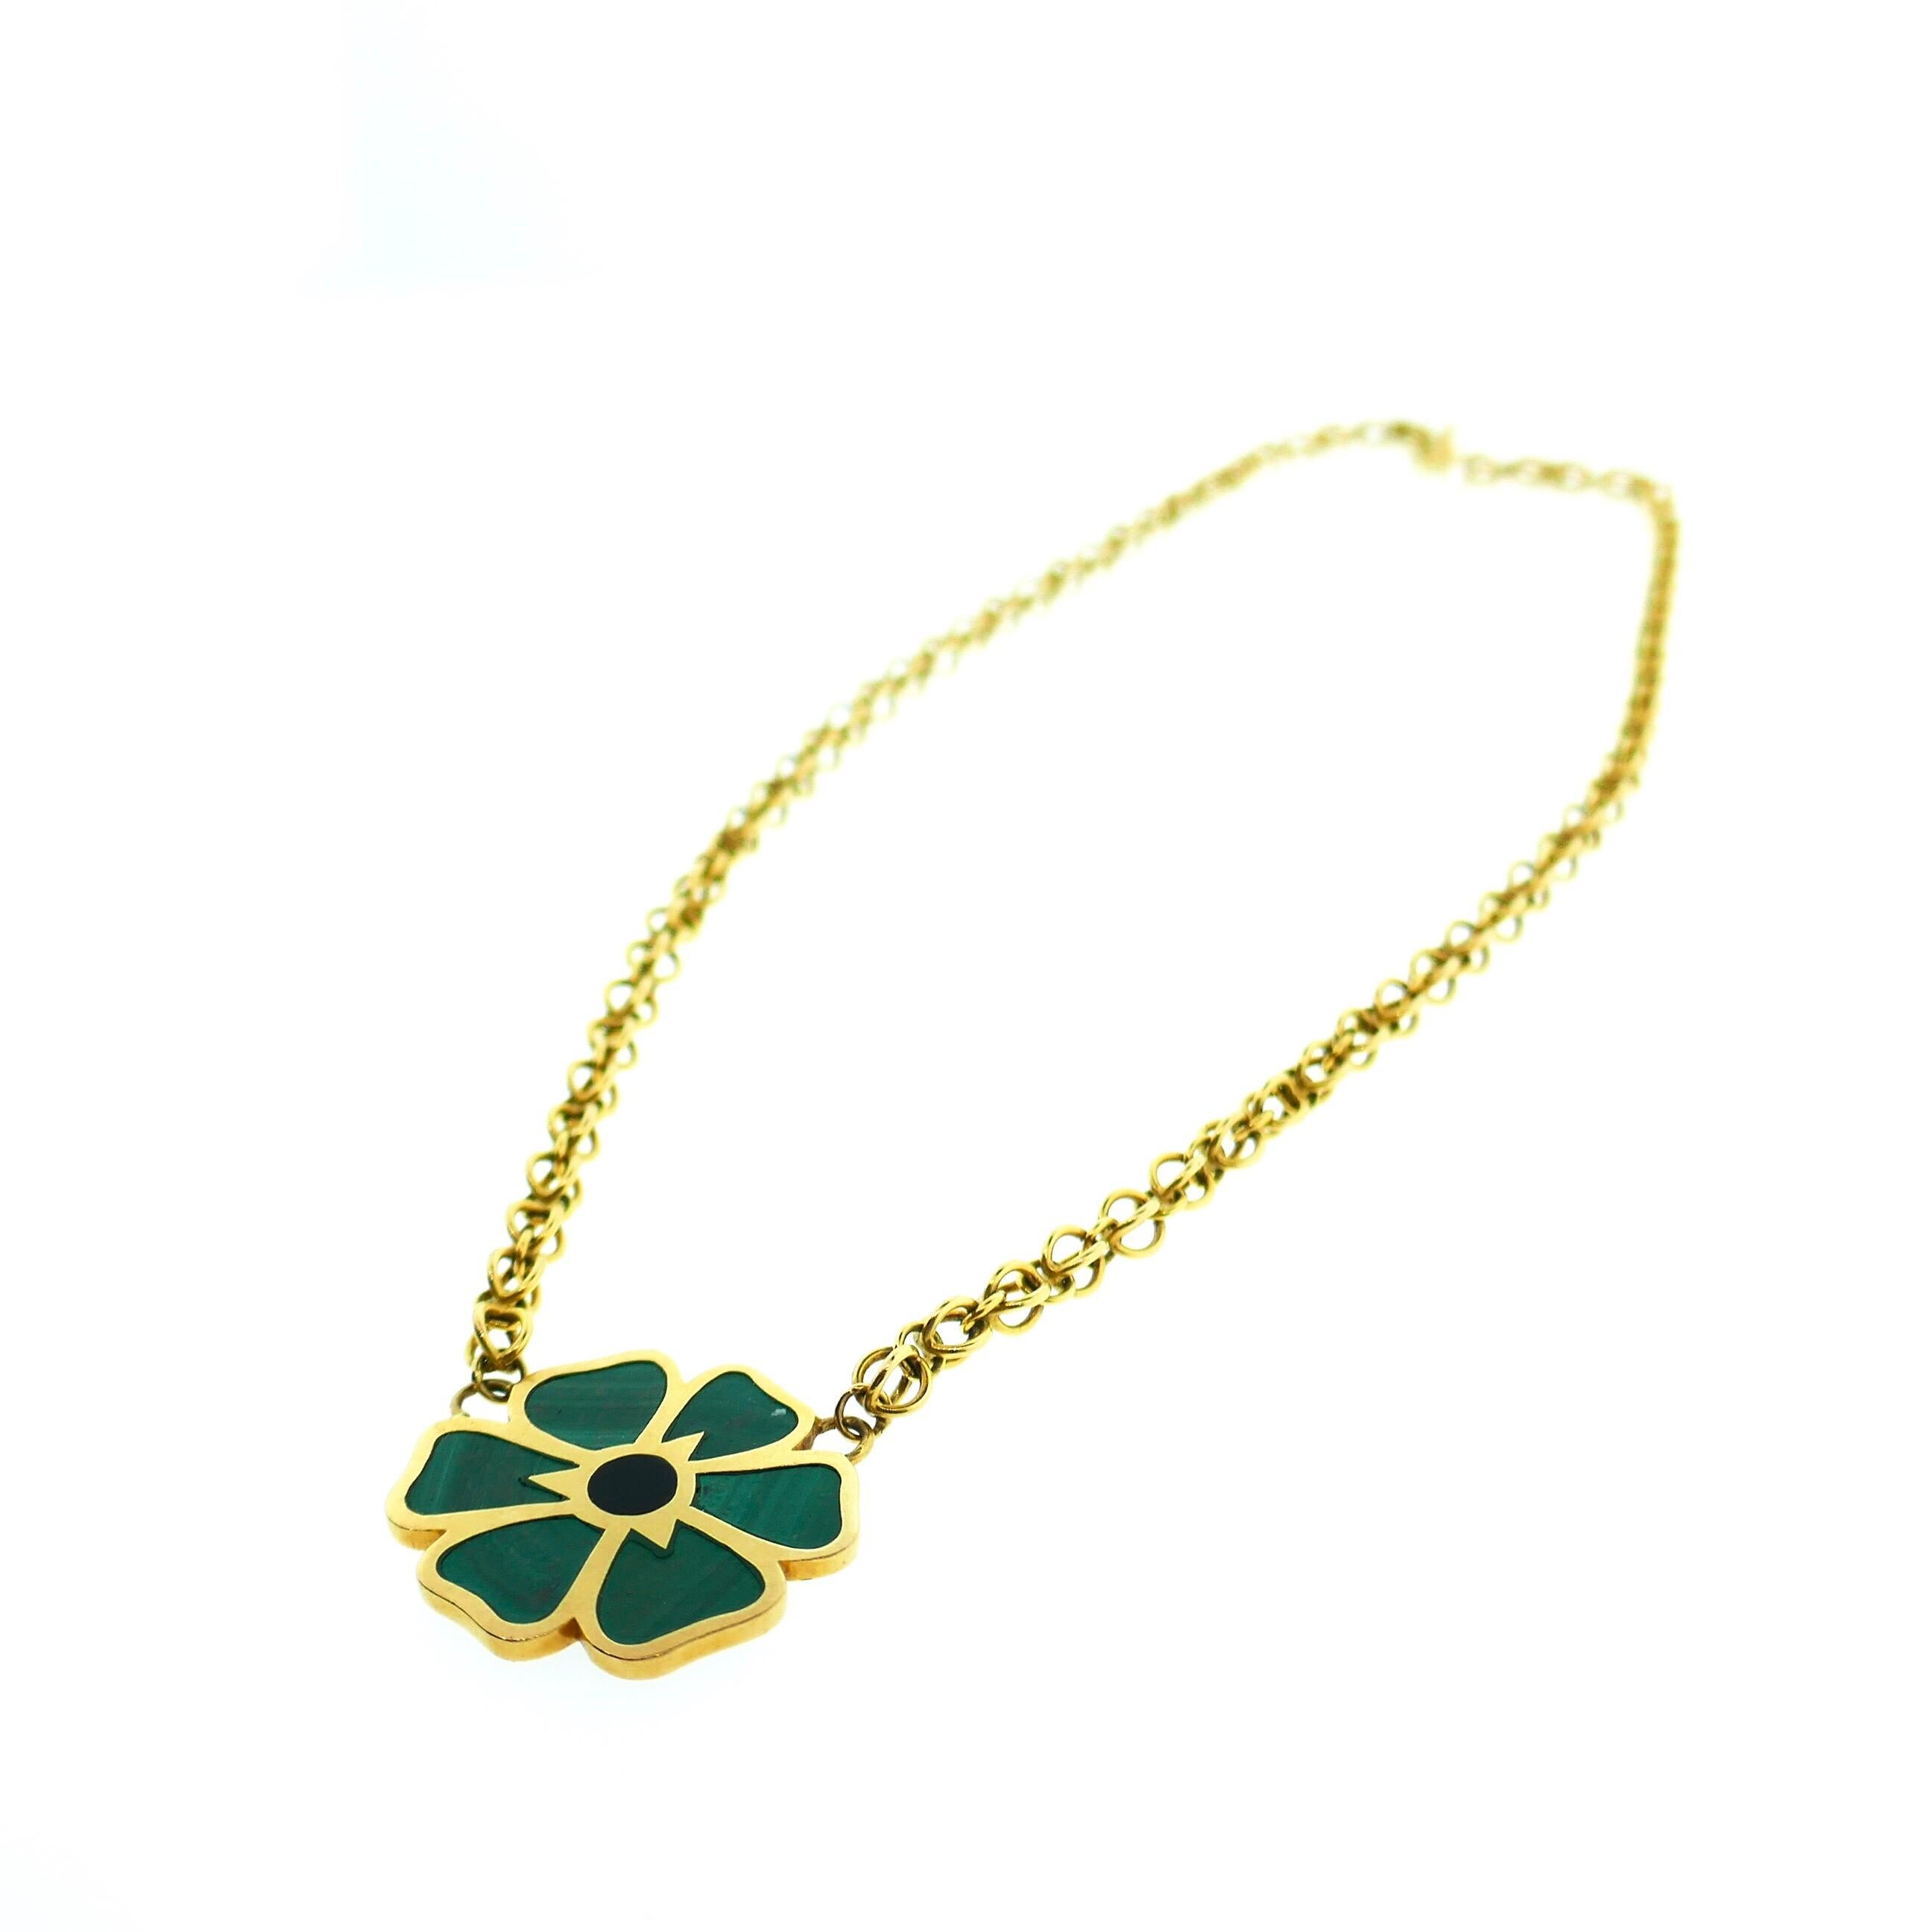 Bvlgari 18 Karat Yellow Gold Malachite Onyx Flower Necklace

This is a beautiful Bvlgari malachite and onyx flower necklace. 

Weight: 26.1 Grams 

Dimensions: 15.25